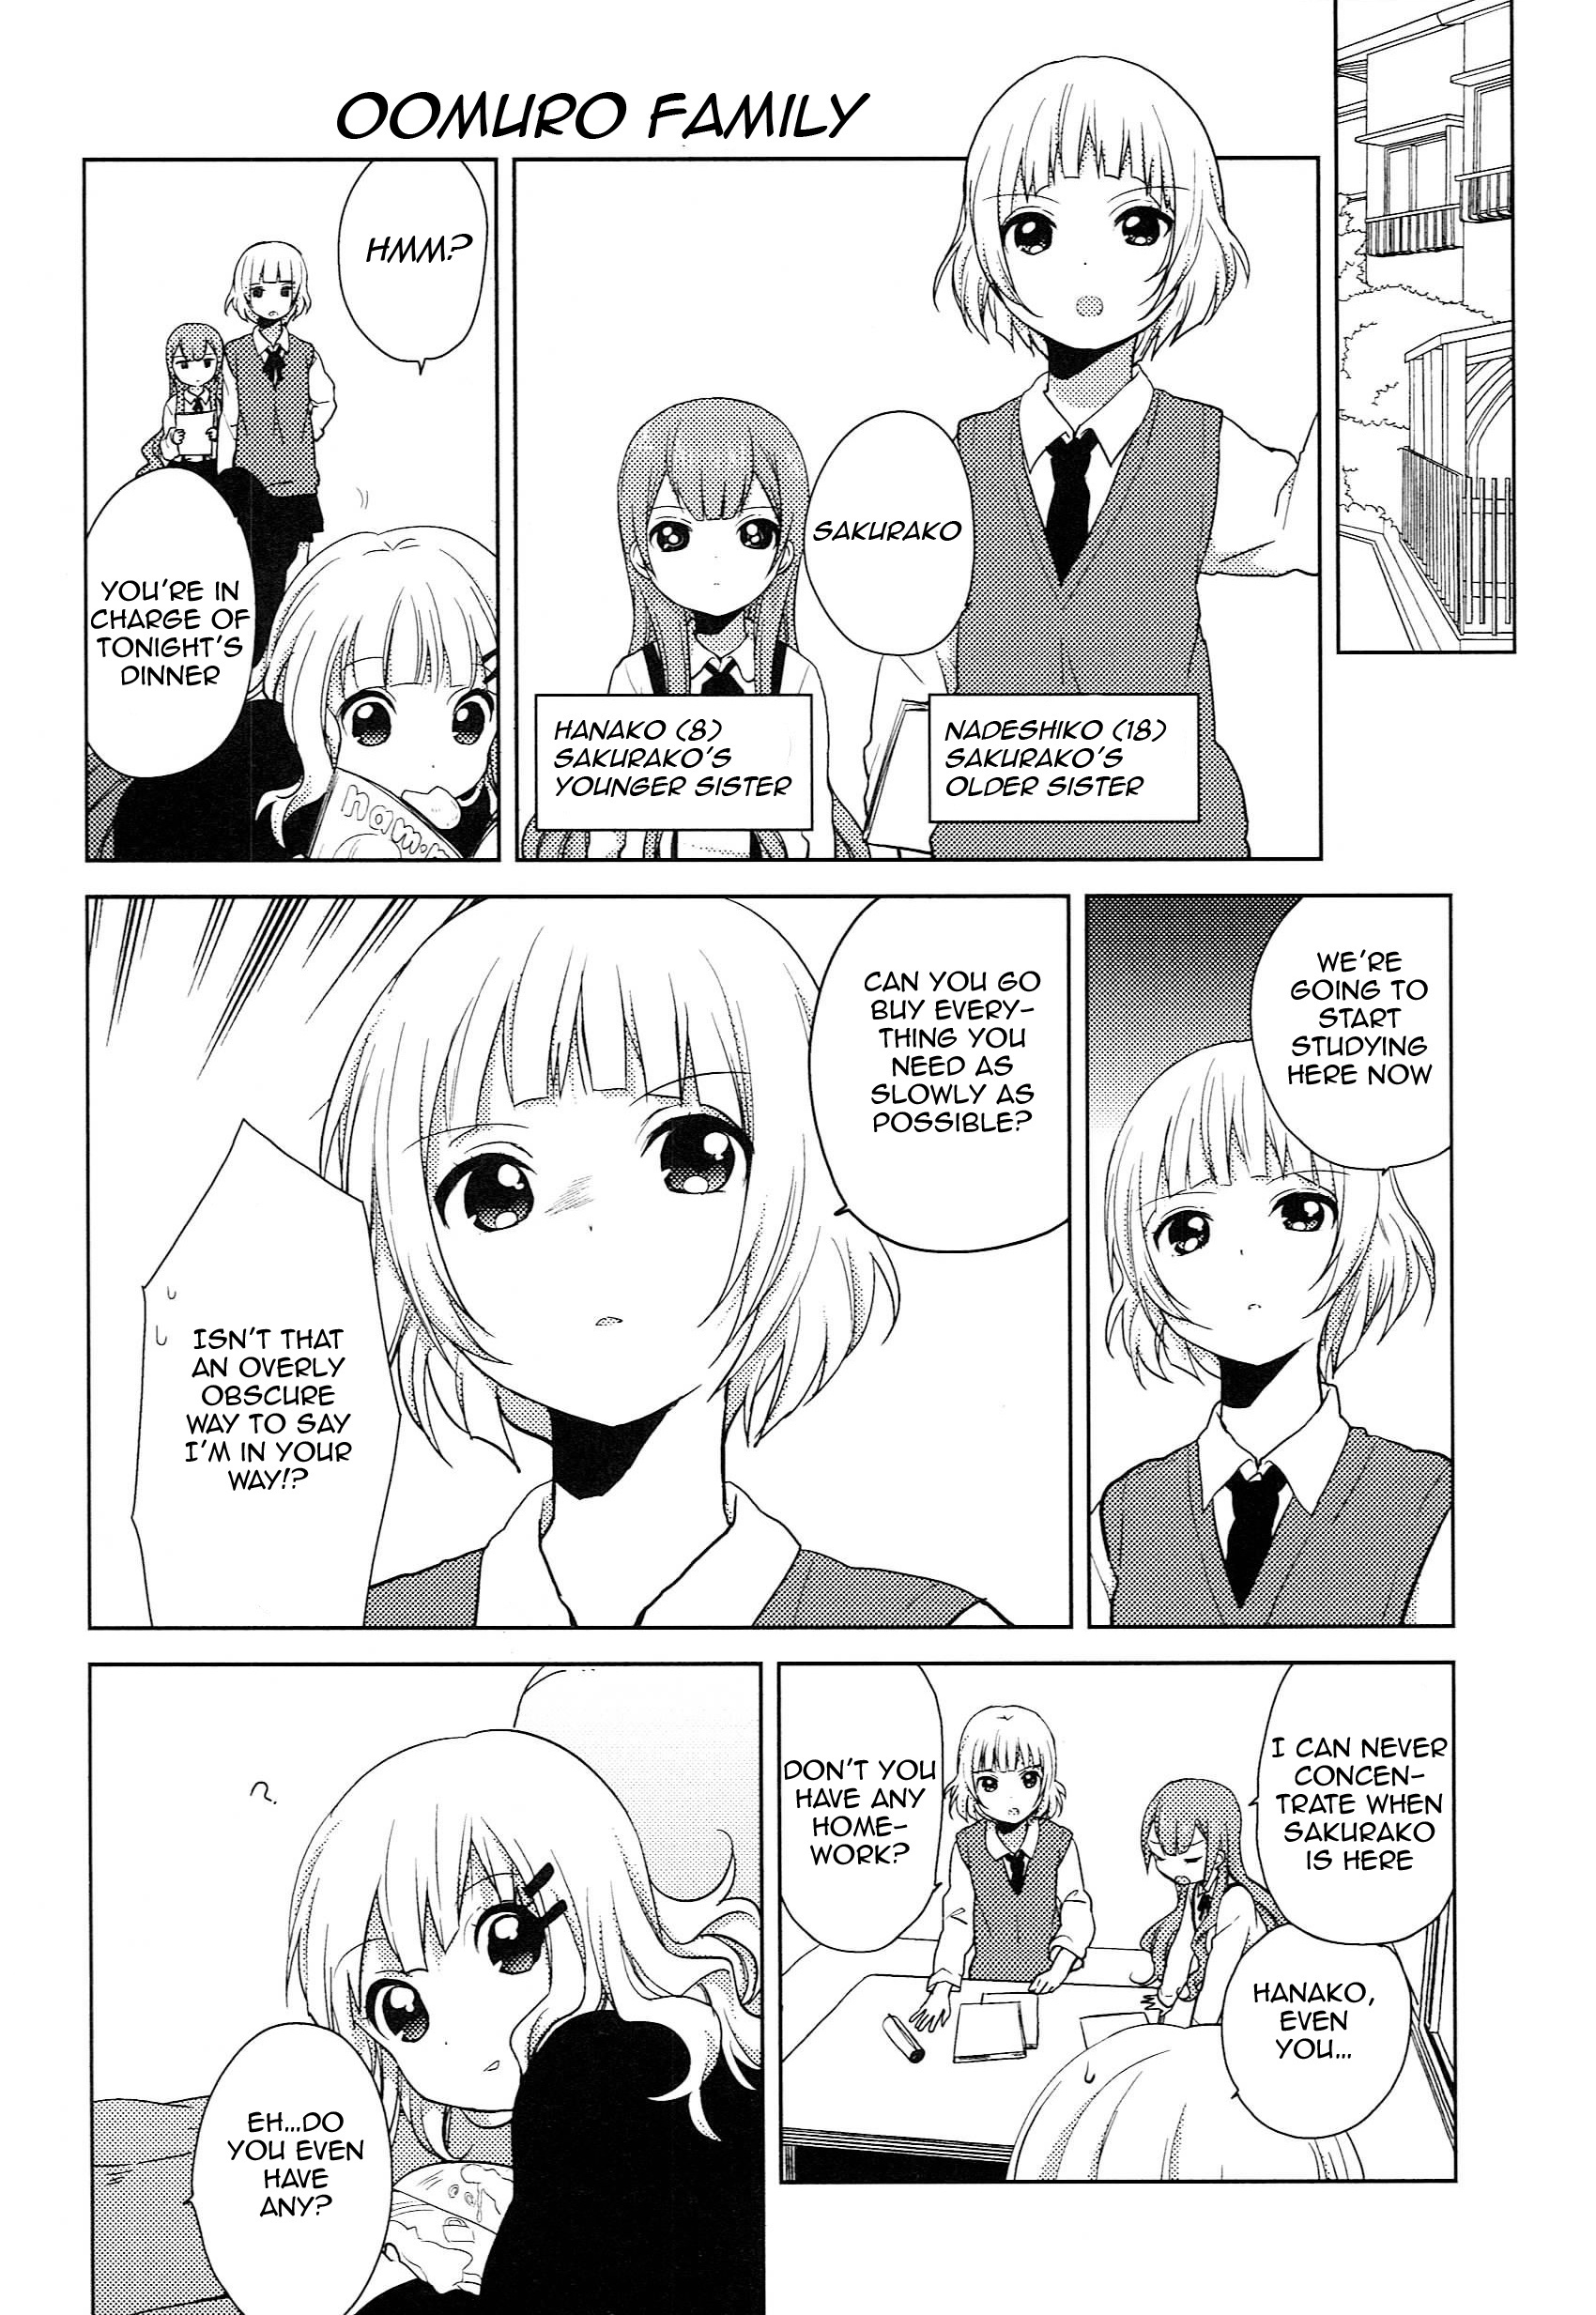 Yuru Yuri Vol.6 Chapter 51.09: Special 7 - The Events Of Each Sister - Picture 2